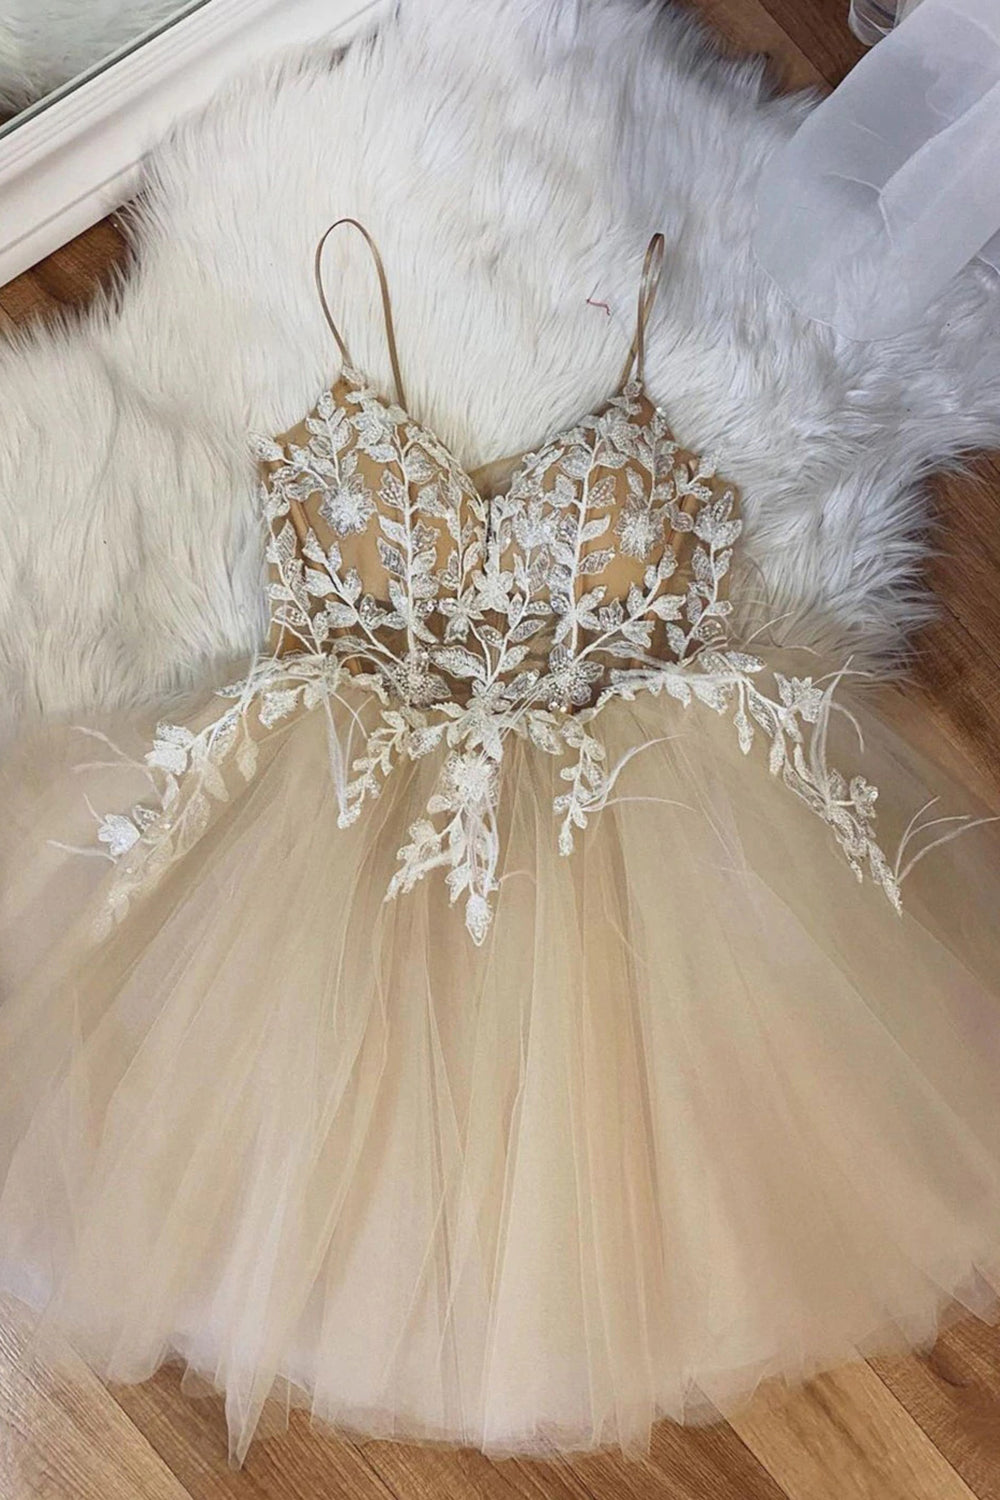 Homecoming Dresses For Girls, Beige Spaghetti Straps Homecoming Dress With Appliques